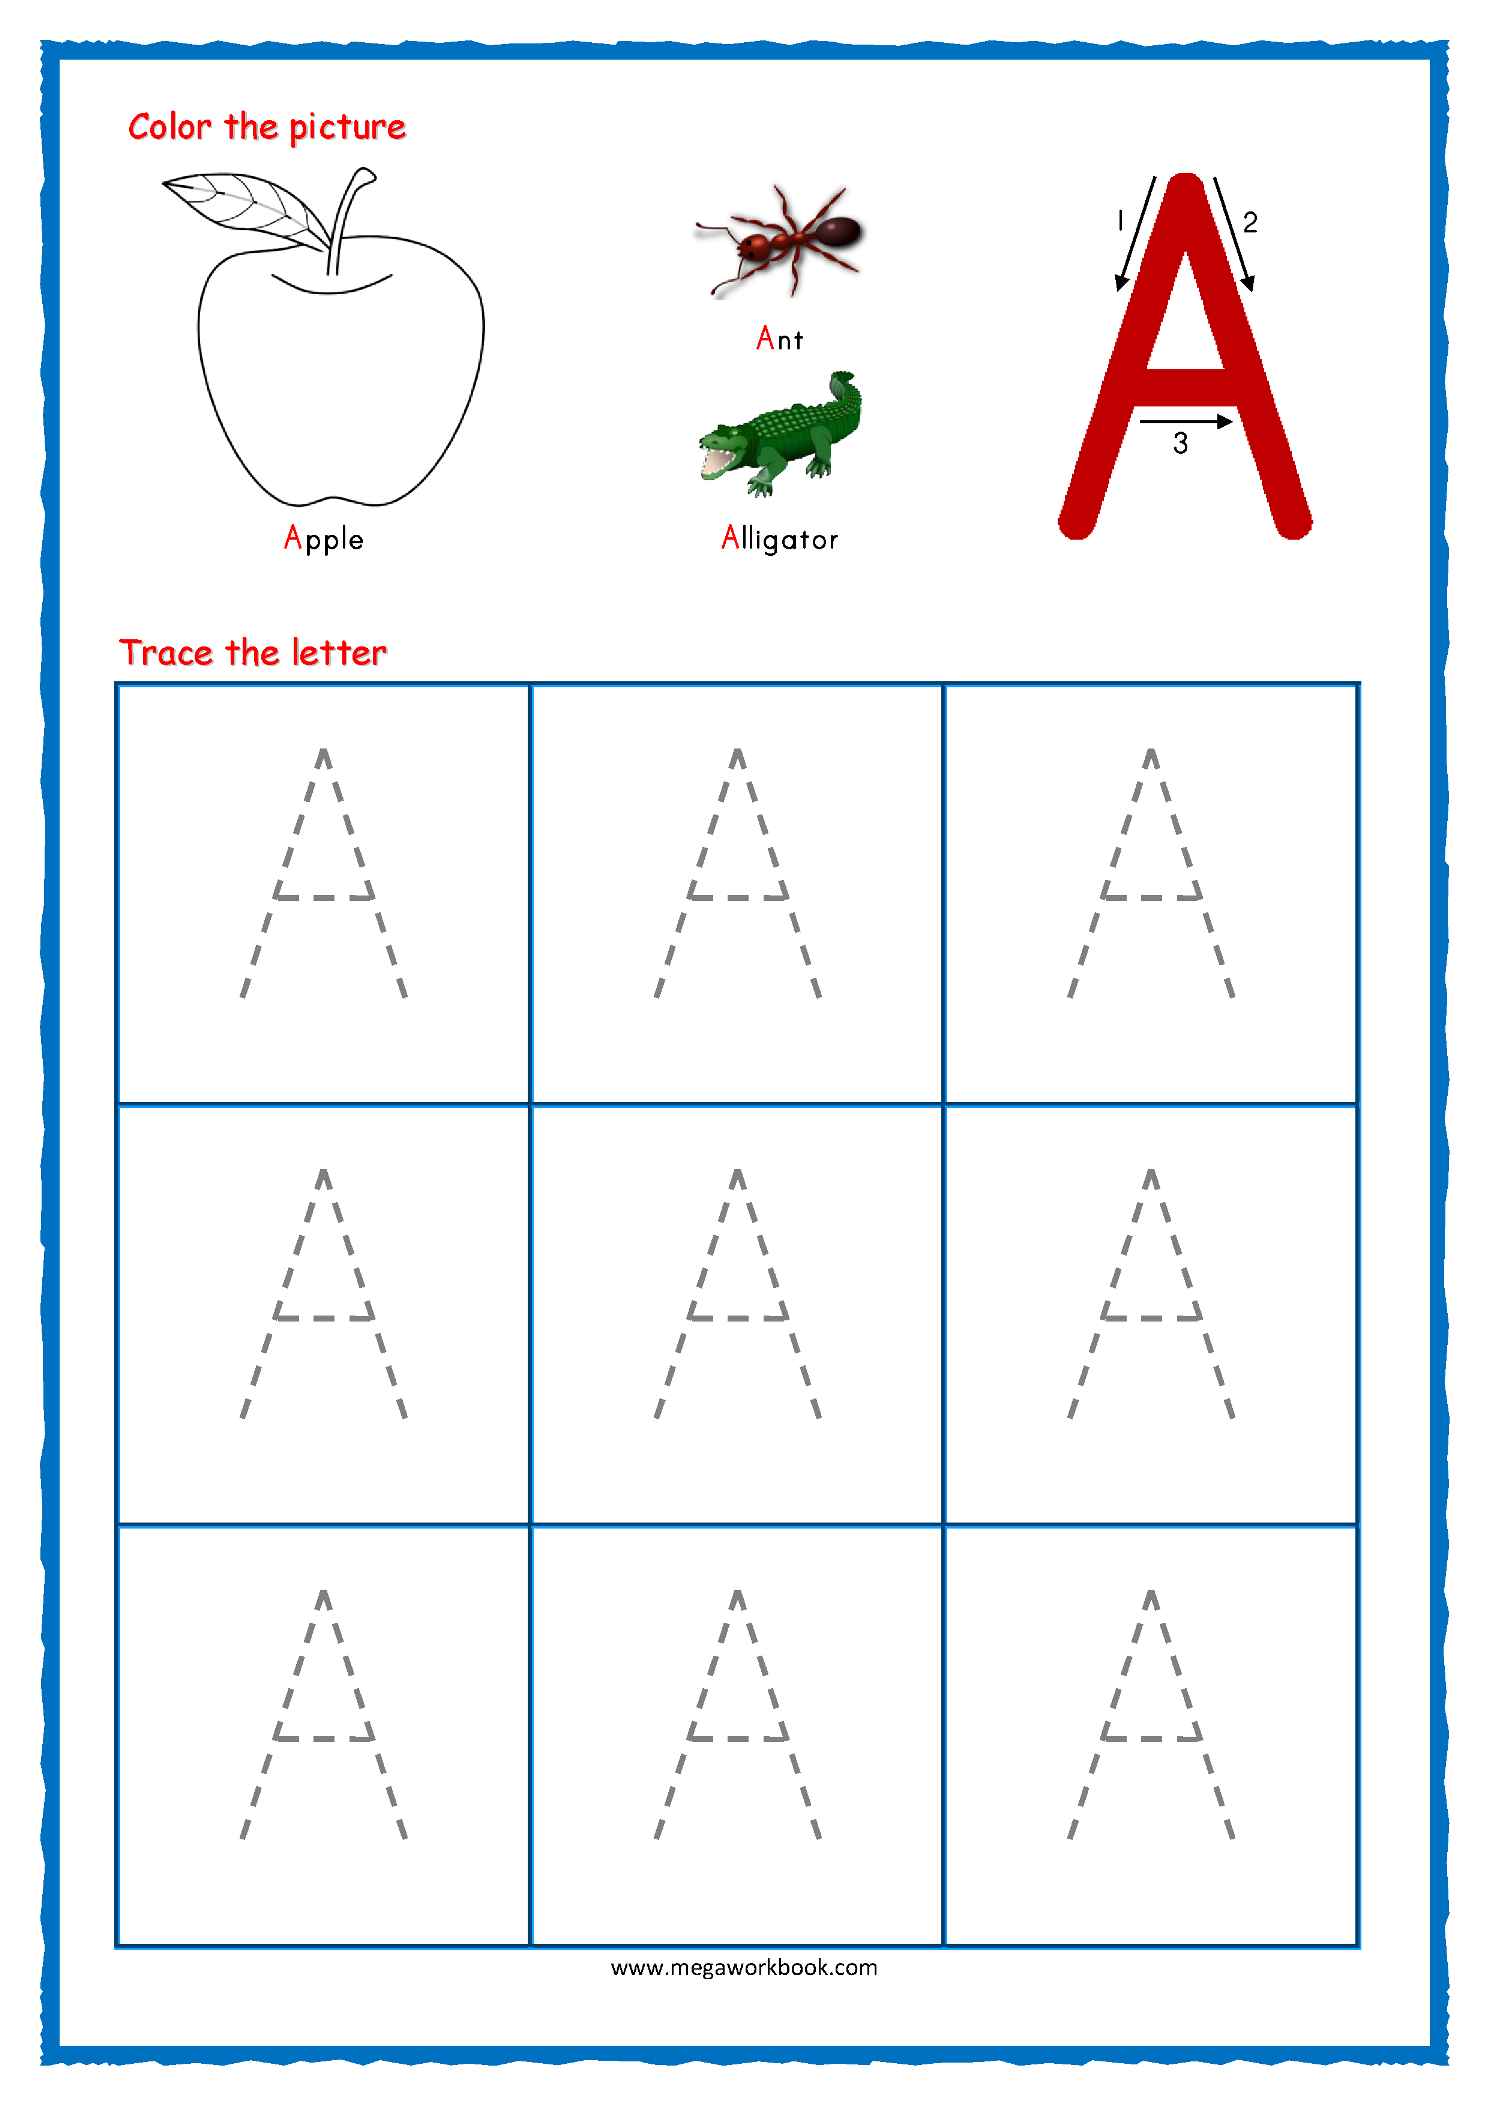 Tracing Letters - Alphabet Tracing - Capital Letters with Tracing The Letter I Worksheets For Preschool